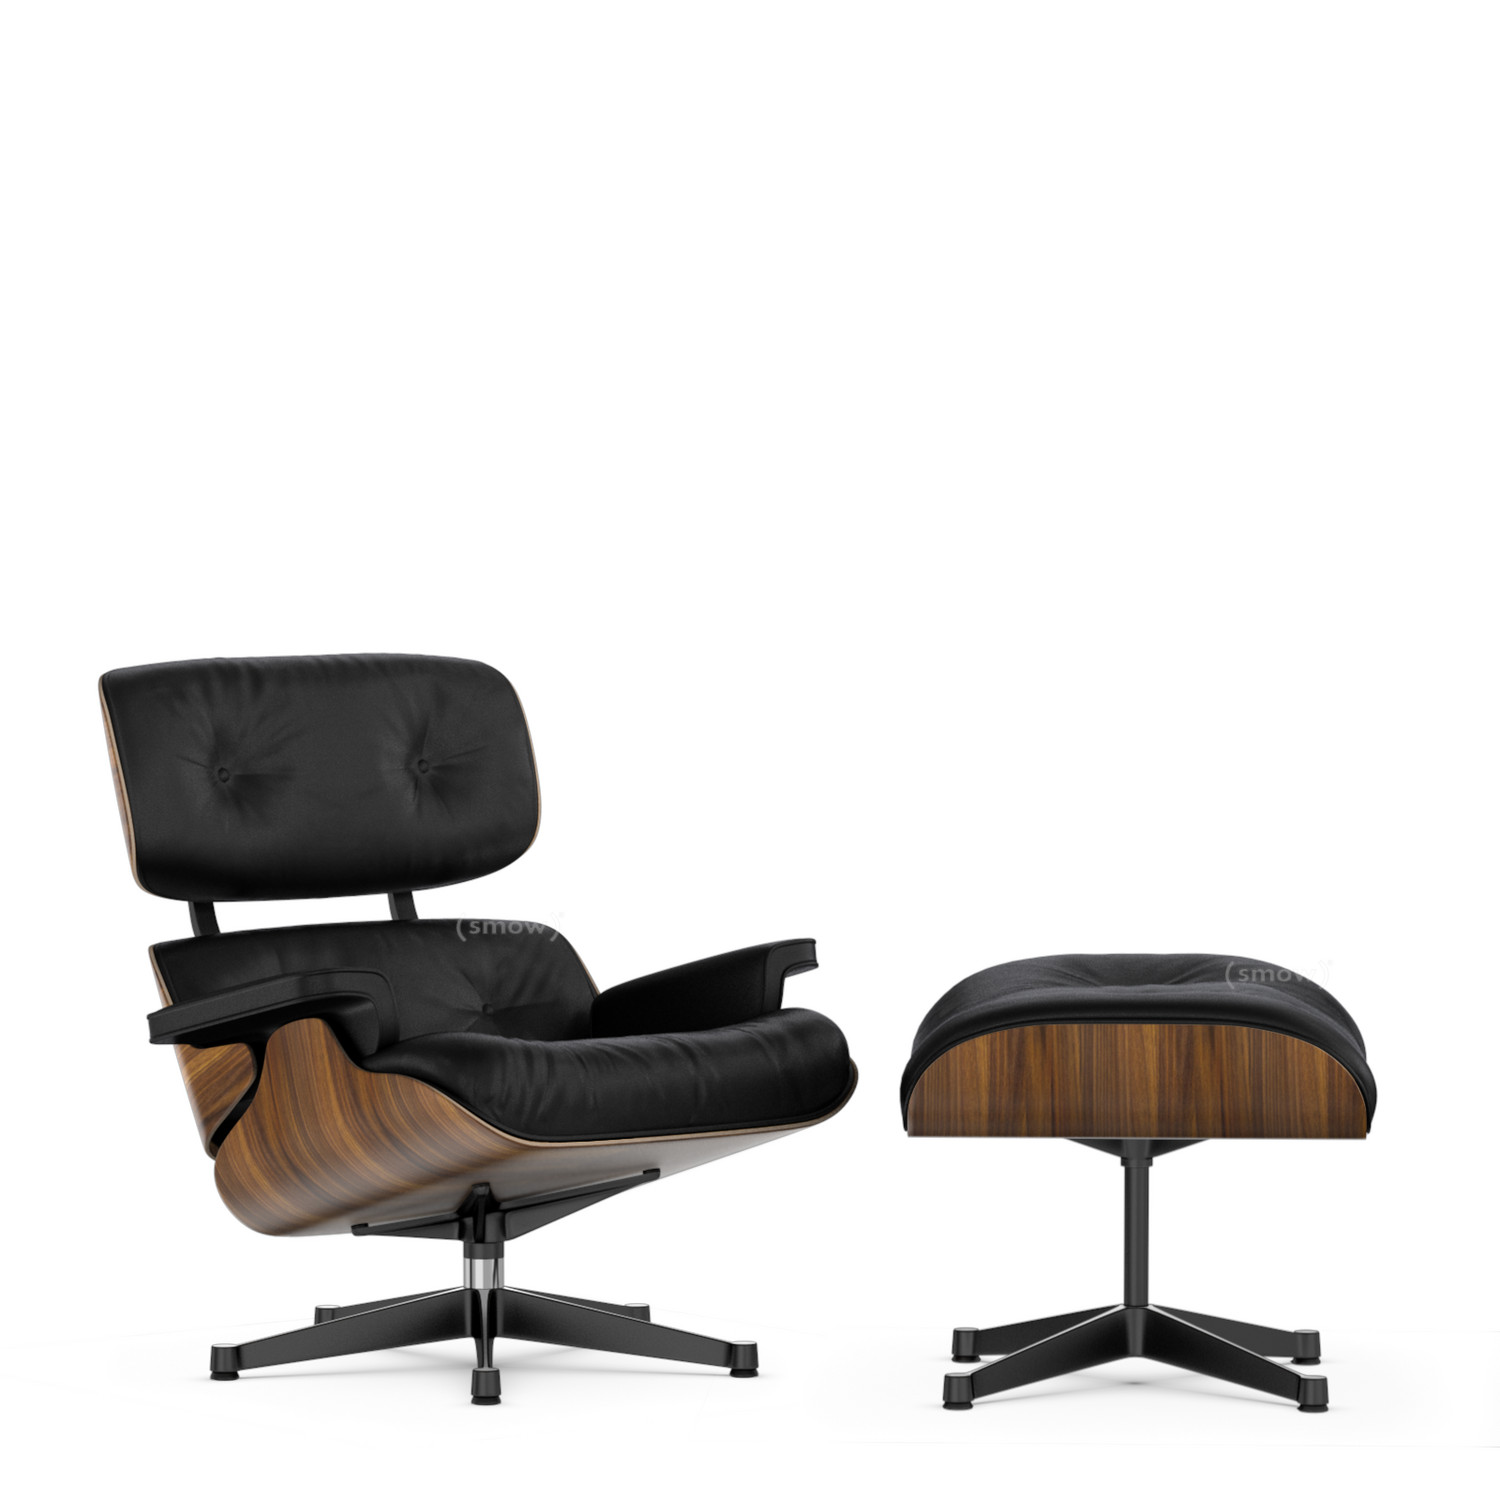 voetstappen Achterhouden paling Vitra Lounge Chair & Ottoman by Charles & Ray Eames, 1956 - Designer  furniture by smow.com